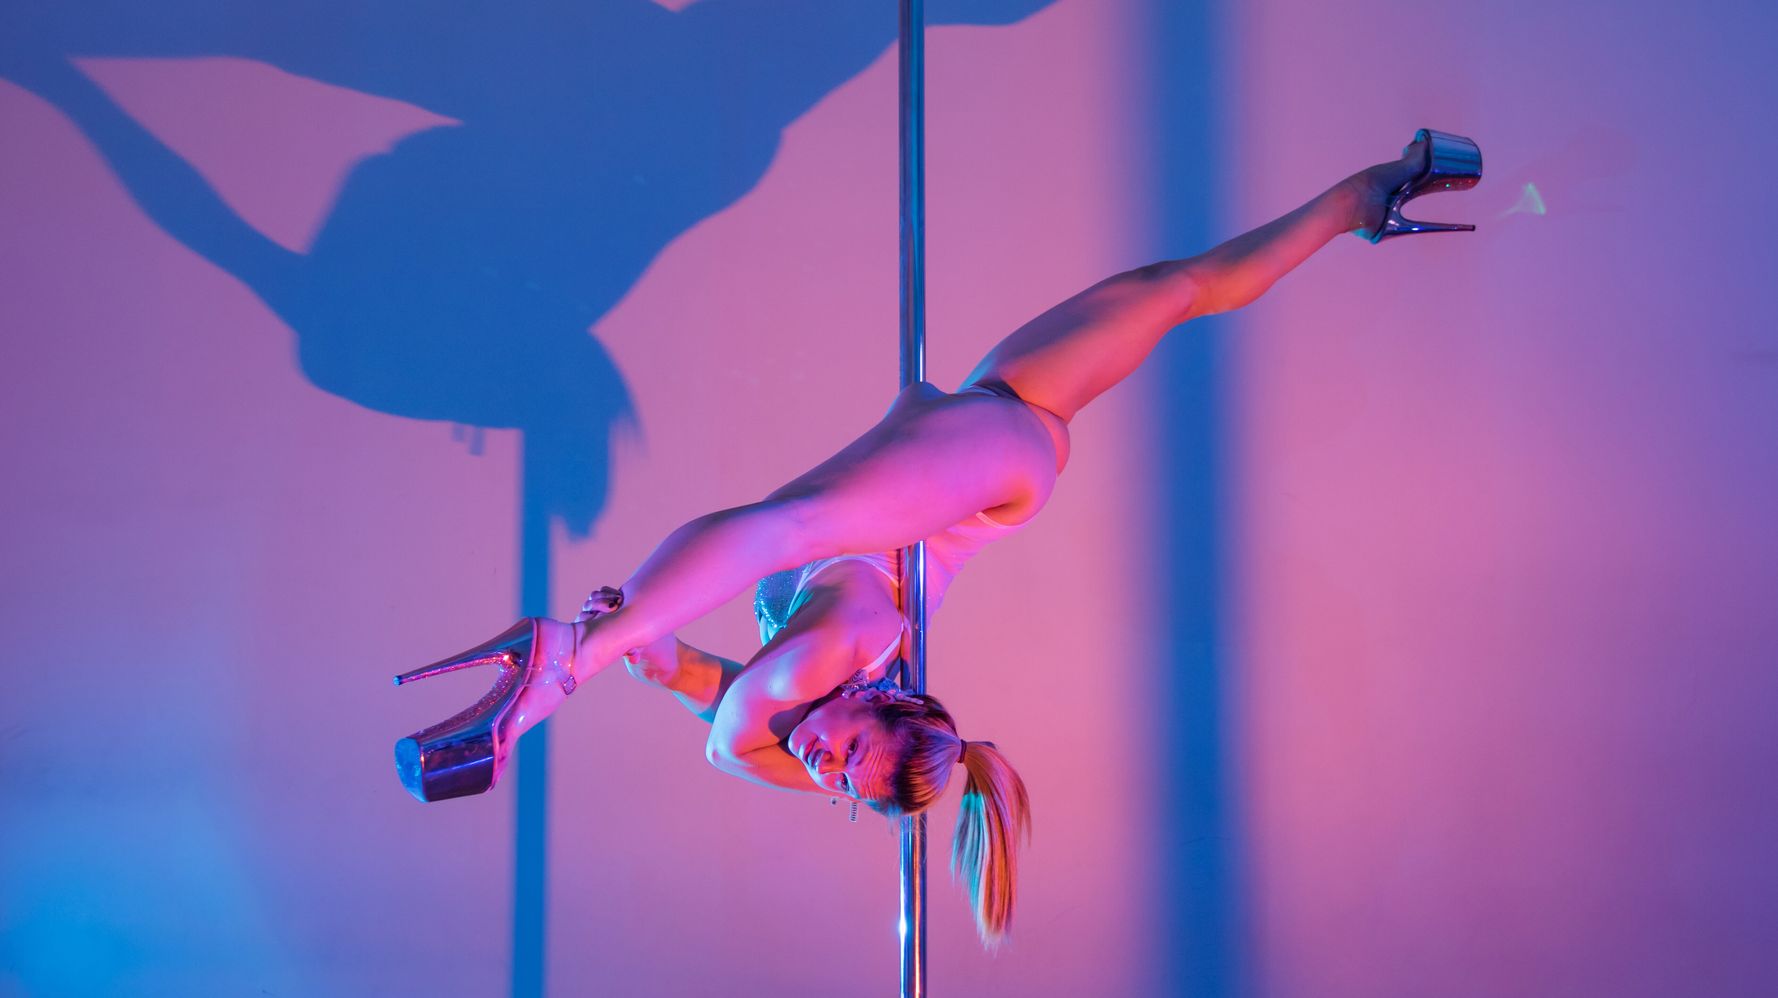 1778px x 998px - When I Was Outed For My Porn Past, Pole Dancing Helped Me Heal | HuffPost